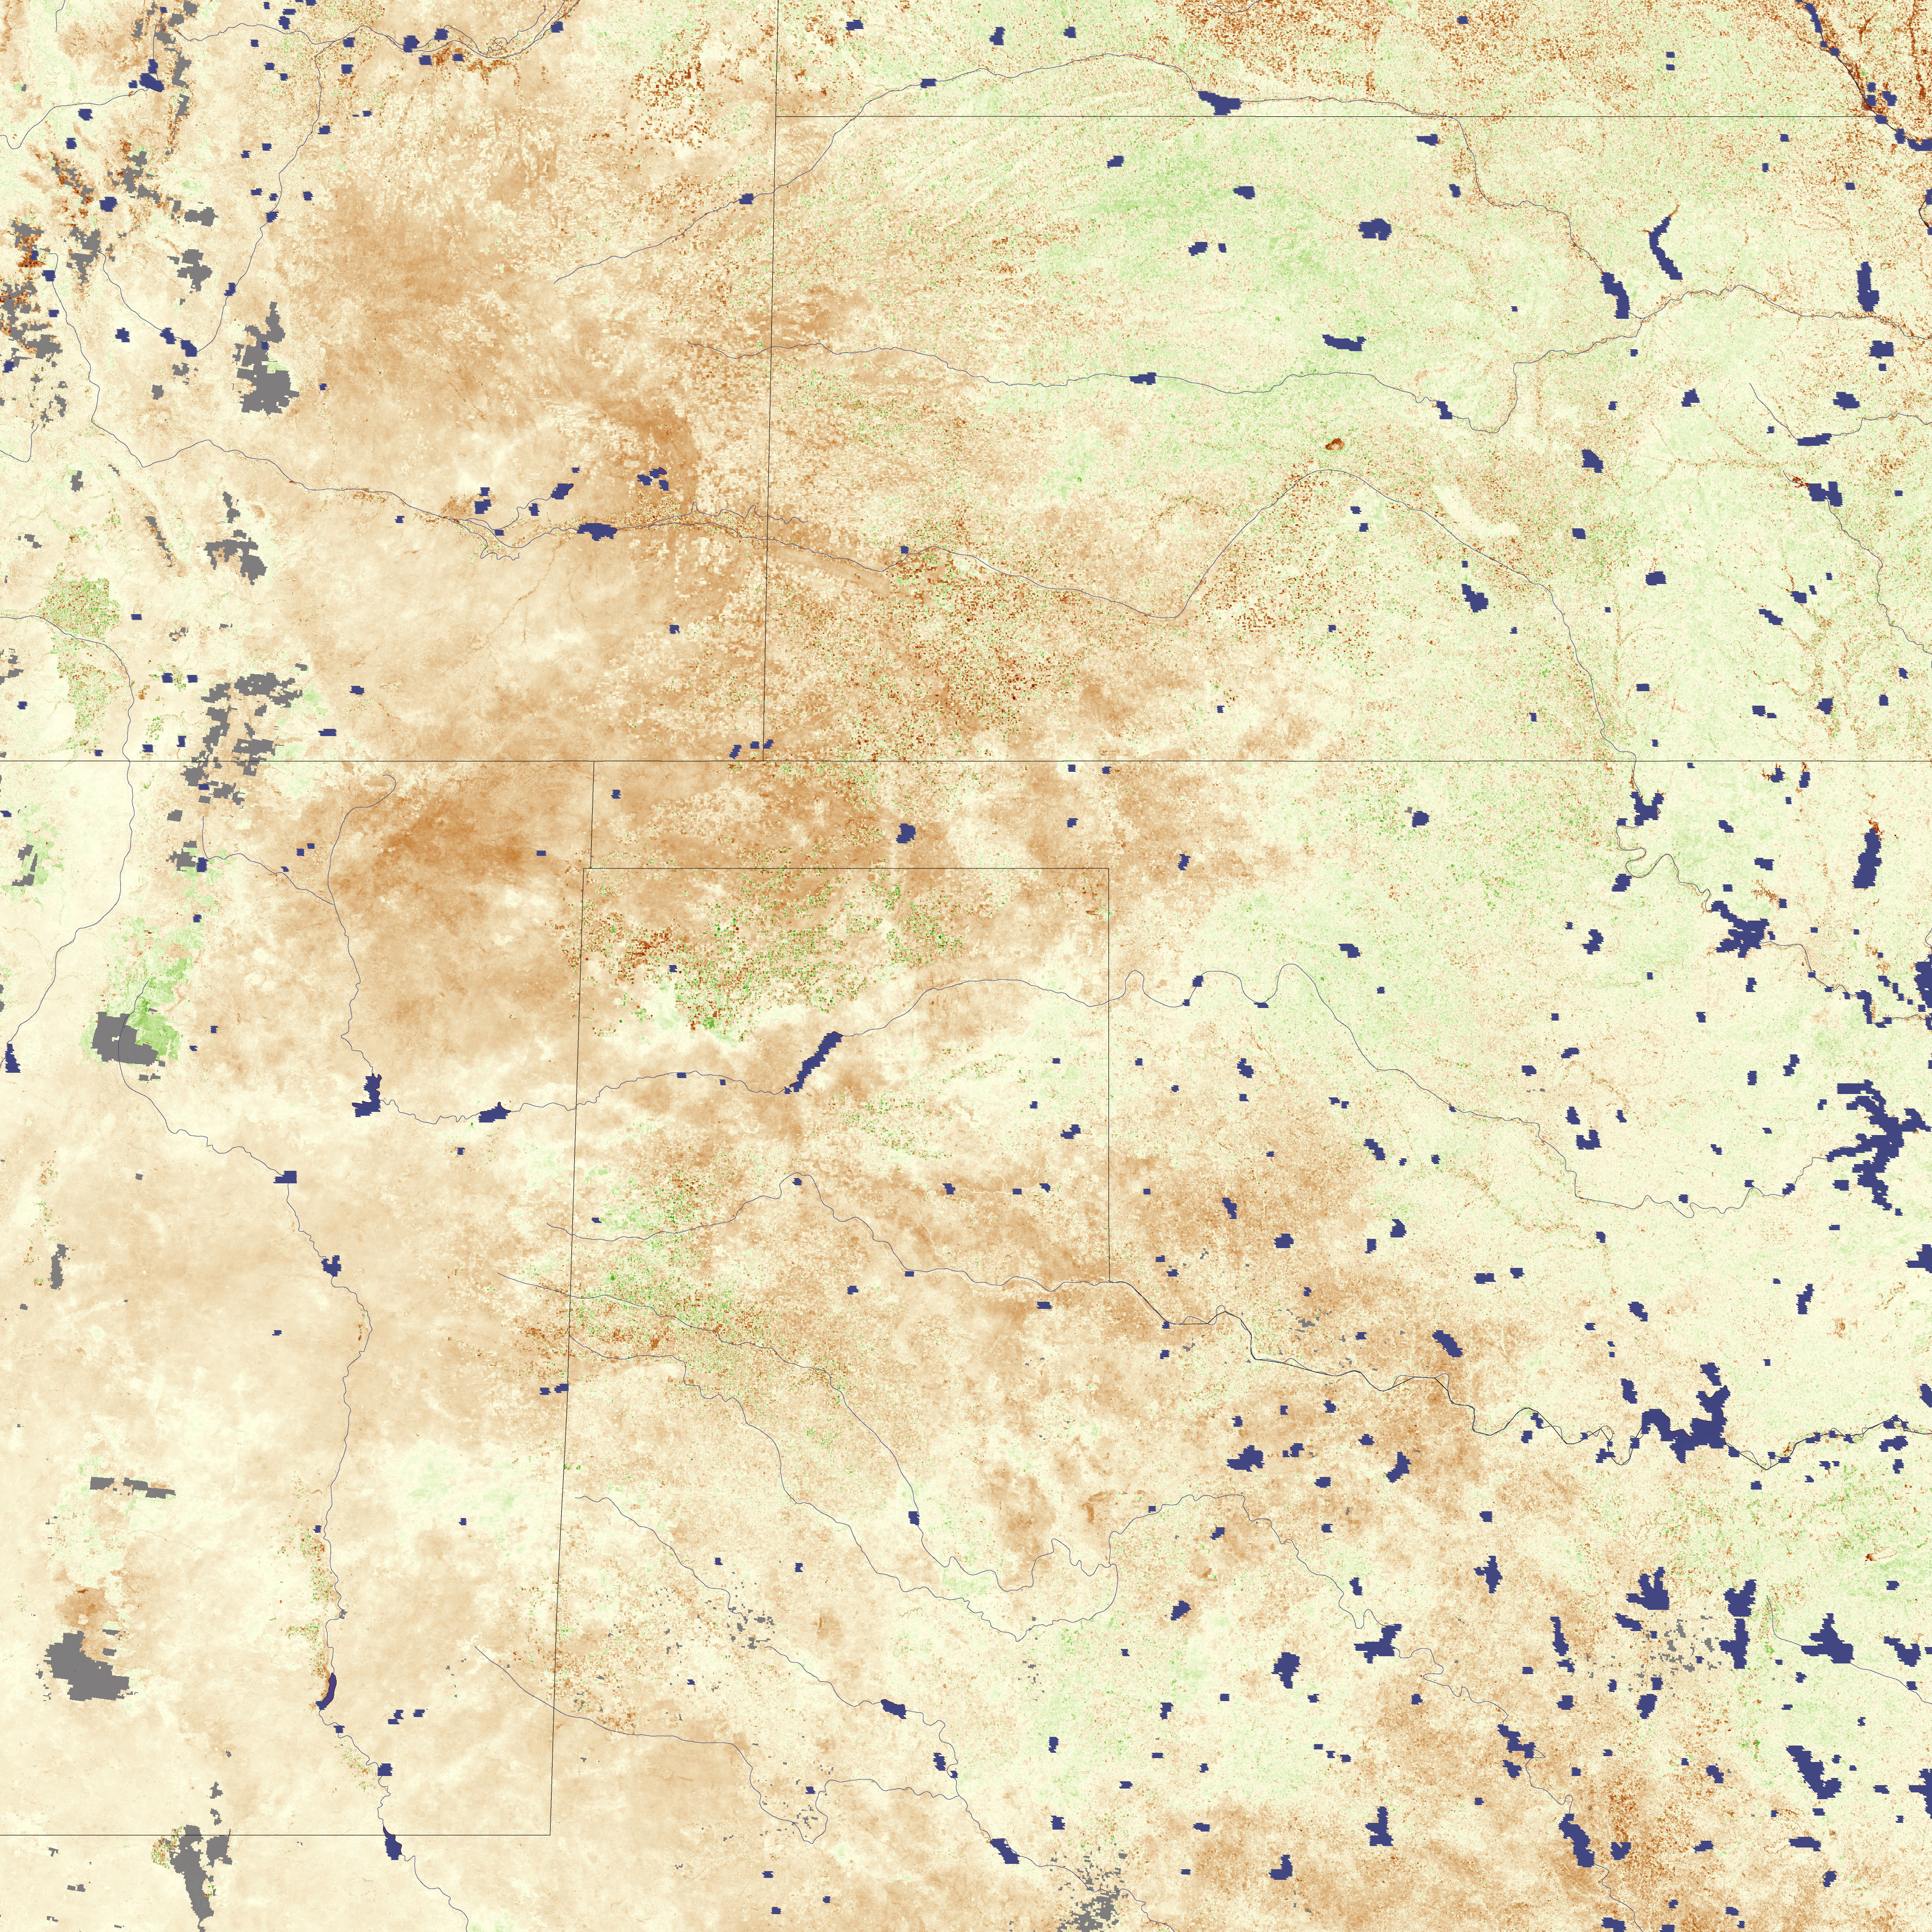 Drought Devastates Vegetation in Oklahoma Panhandle - related image preview